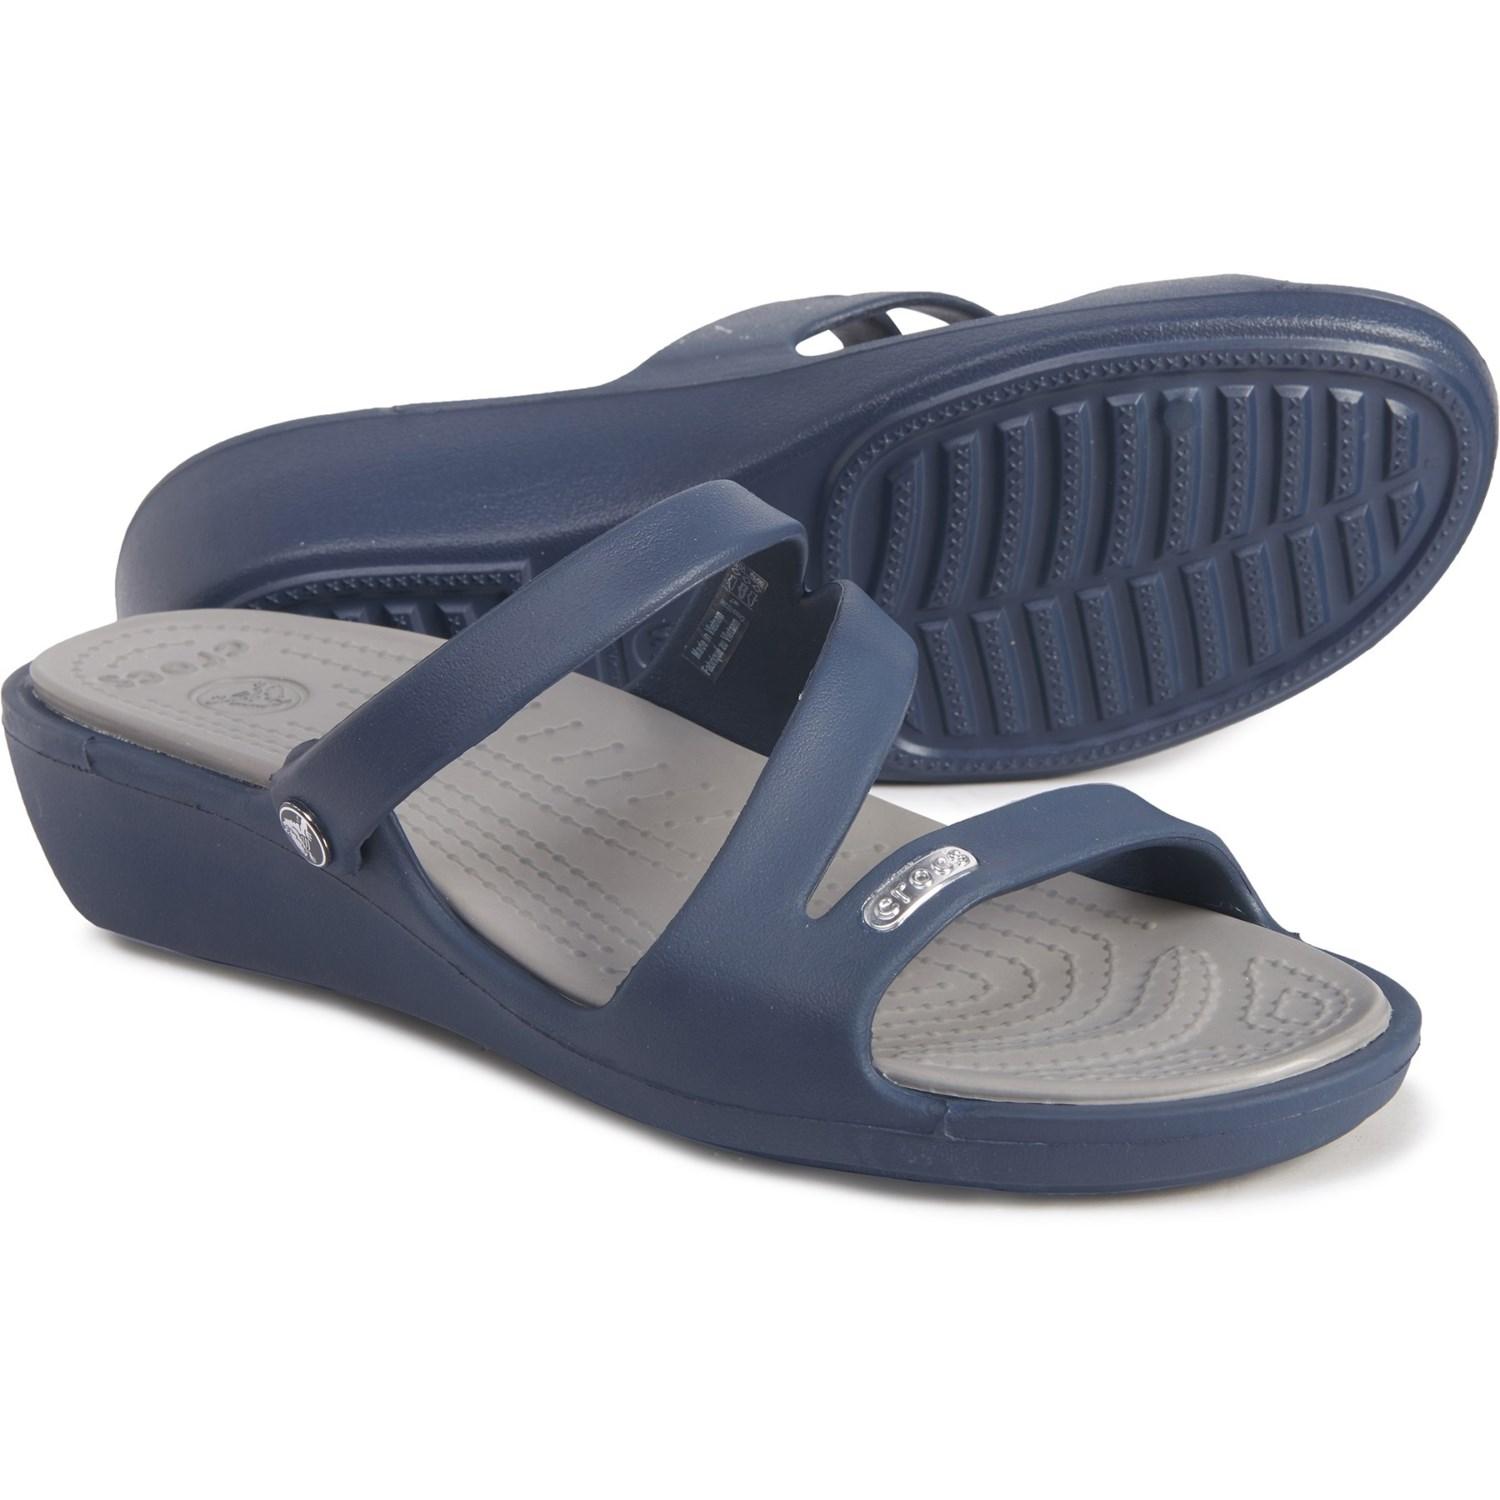 Crocs™ Patricia Wedge Sandals in Navy/Smoke (Blue) - Lyst